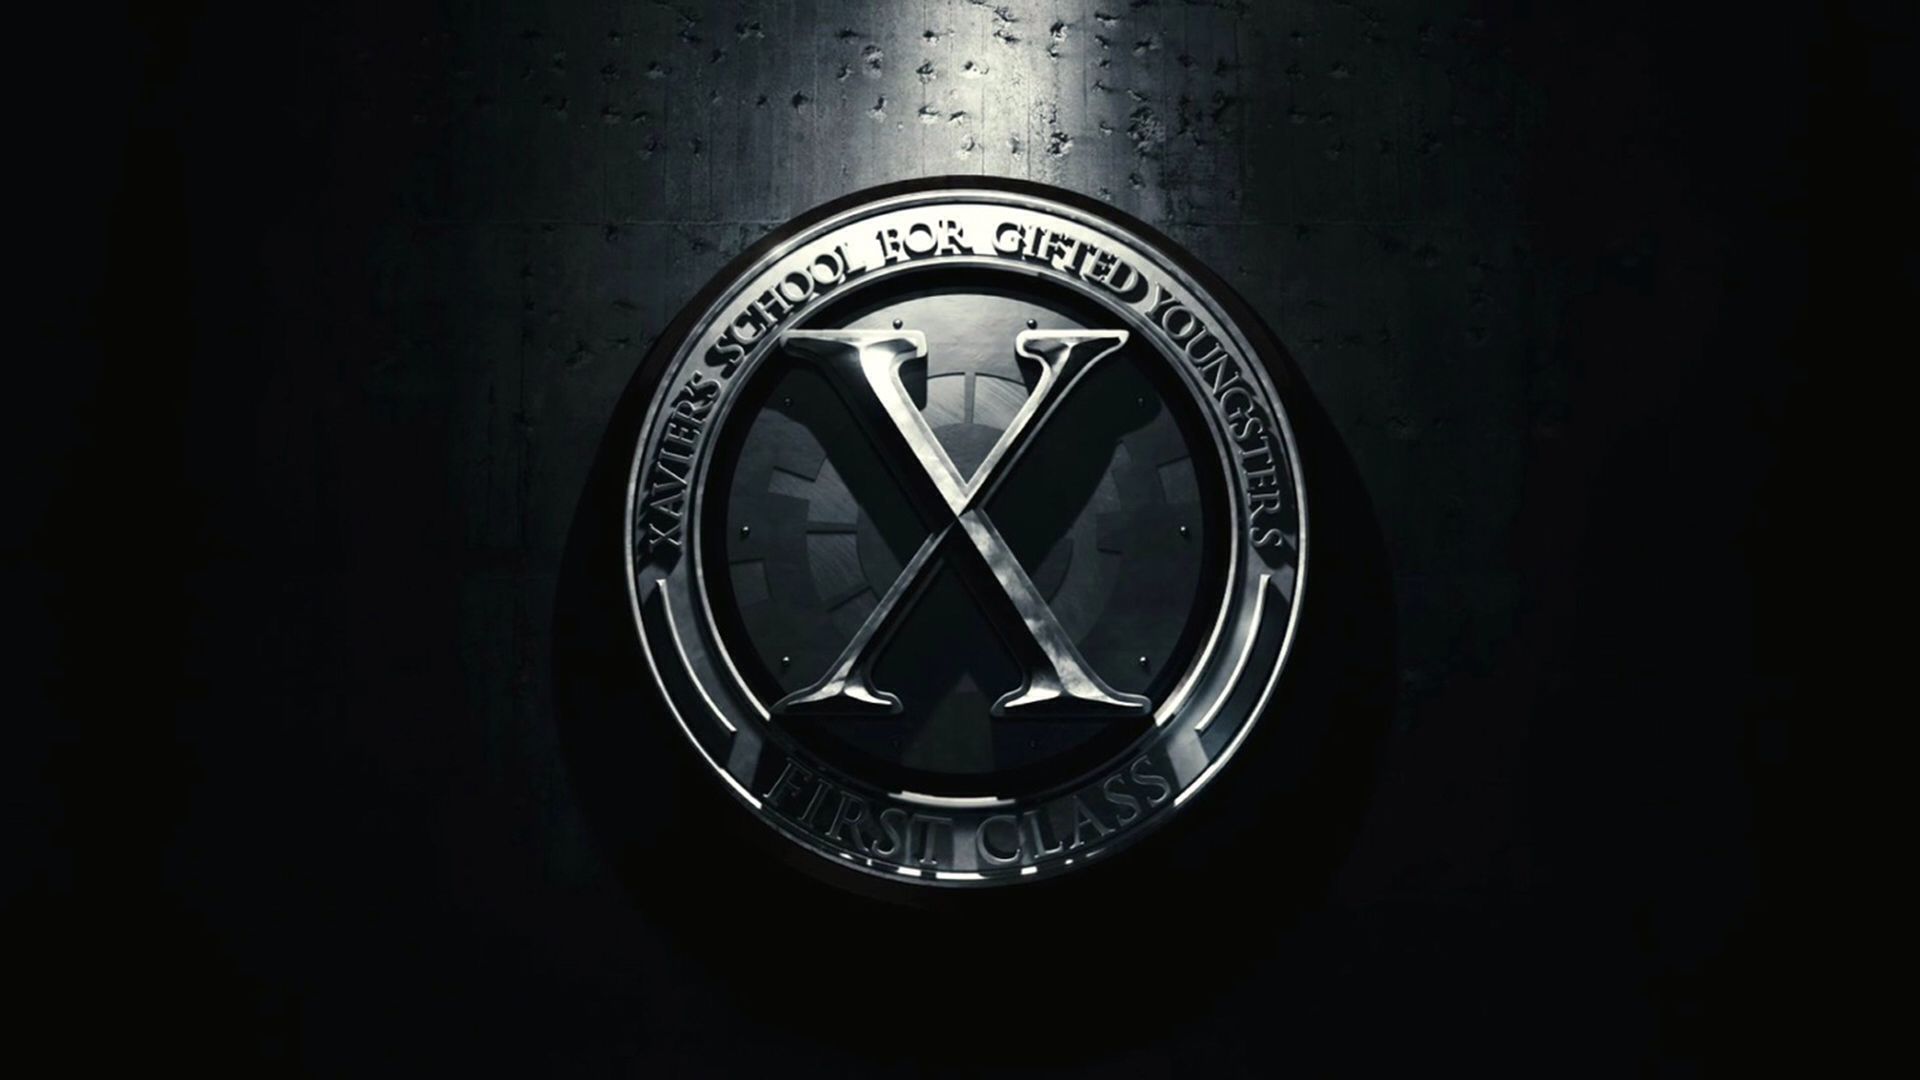 Charles Xavier S School For Gifted Youngsters Emblem Man